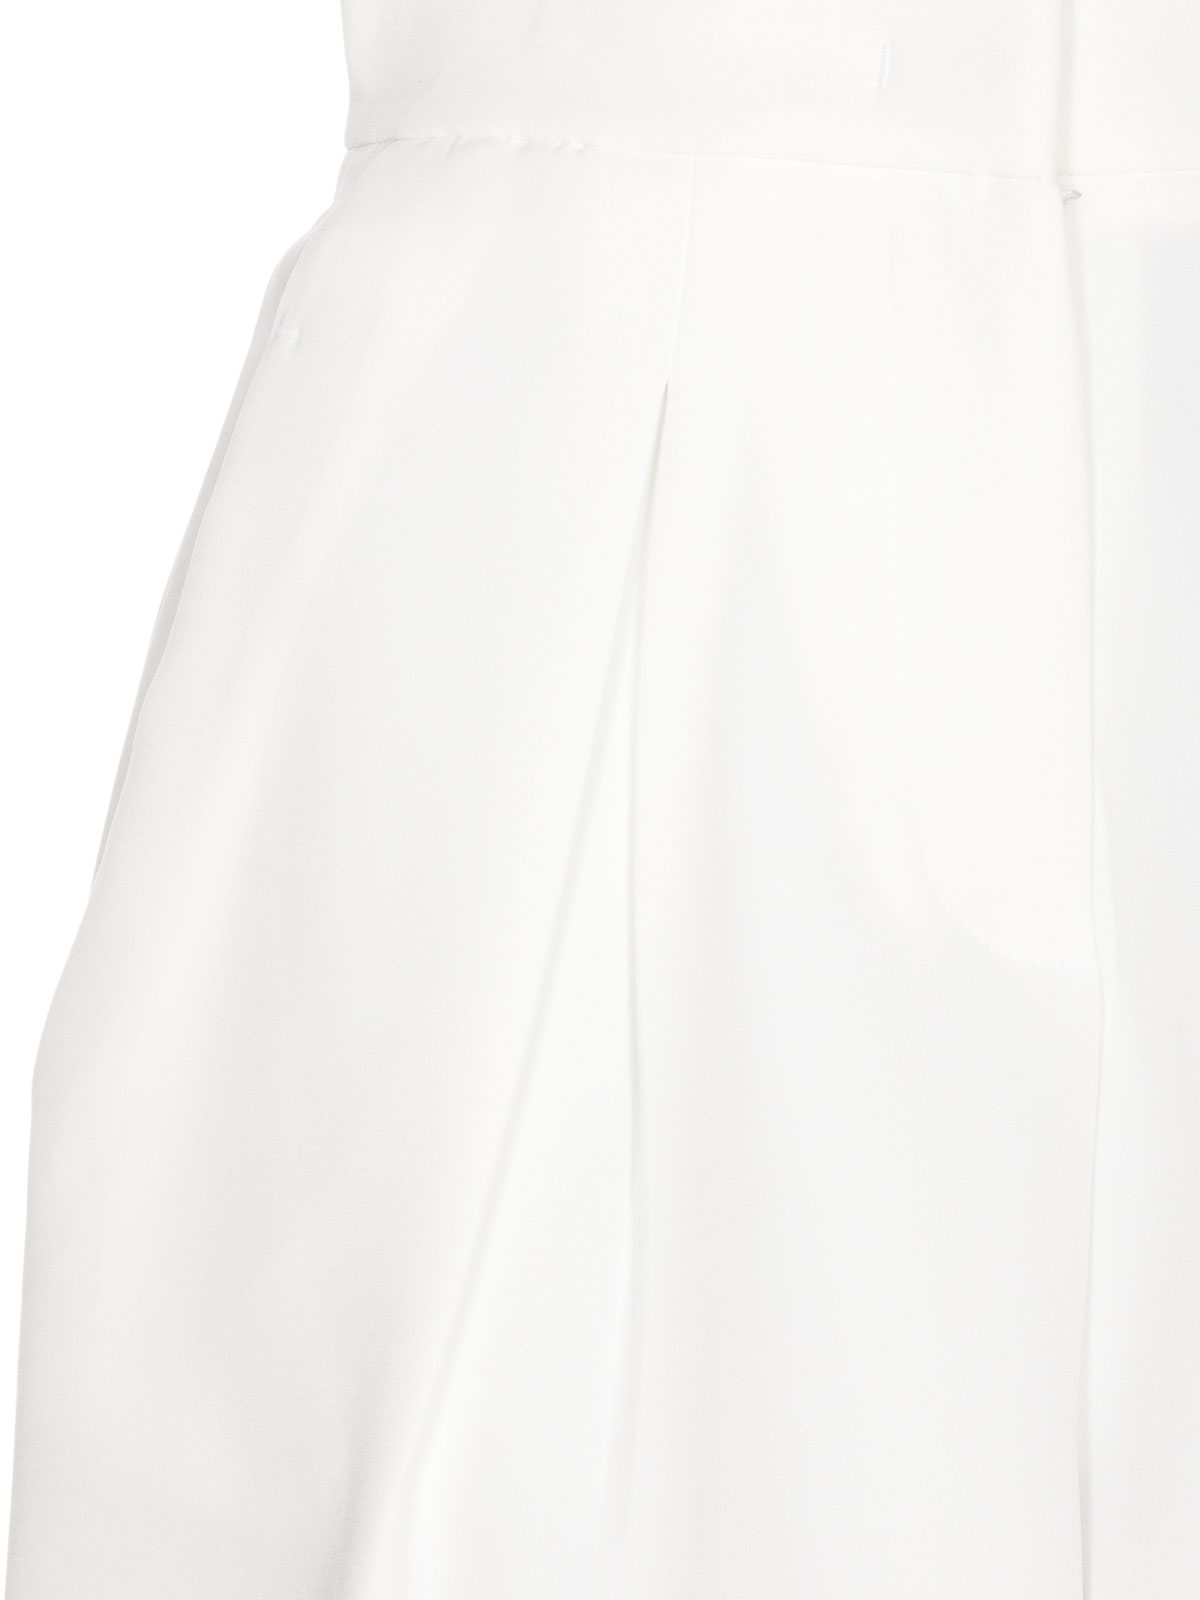 Shop Hinnominate White Shirts Frontal Zip And Buttons